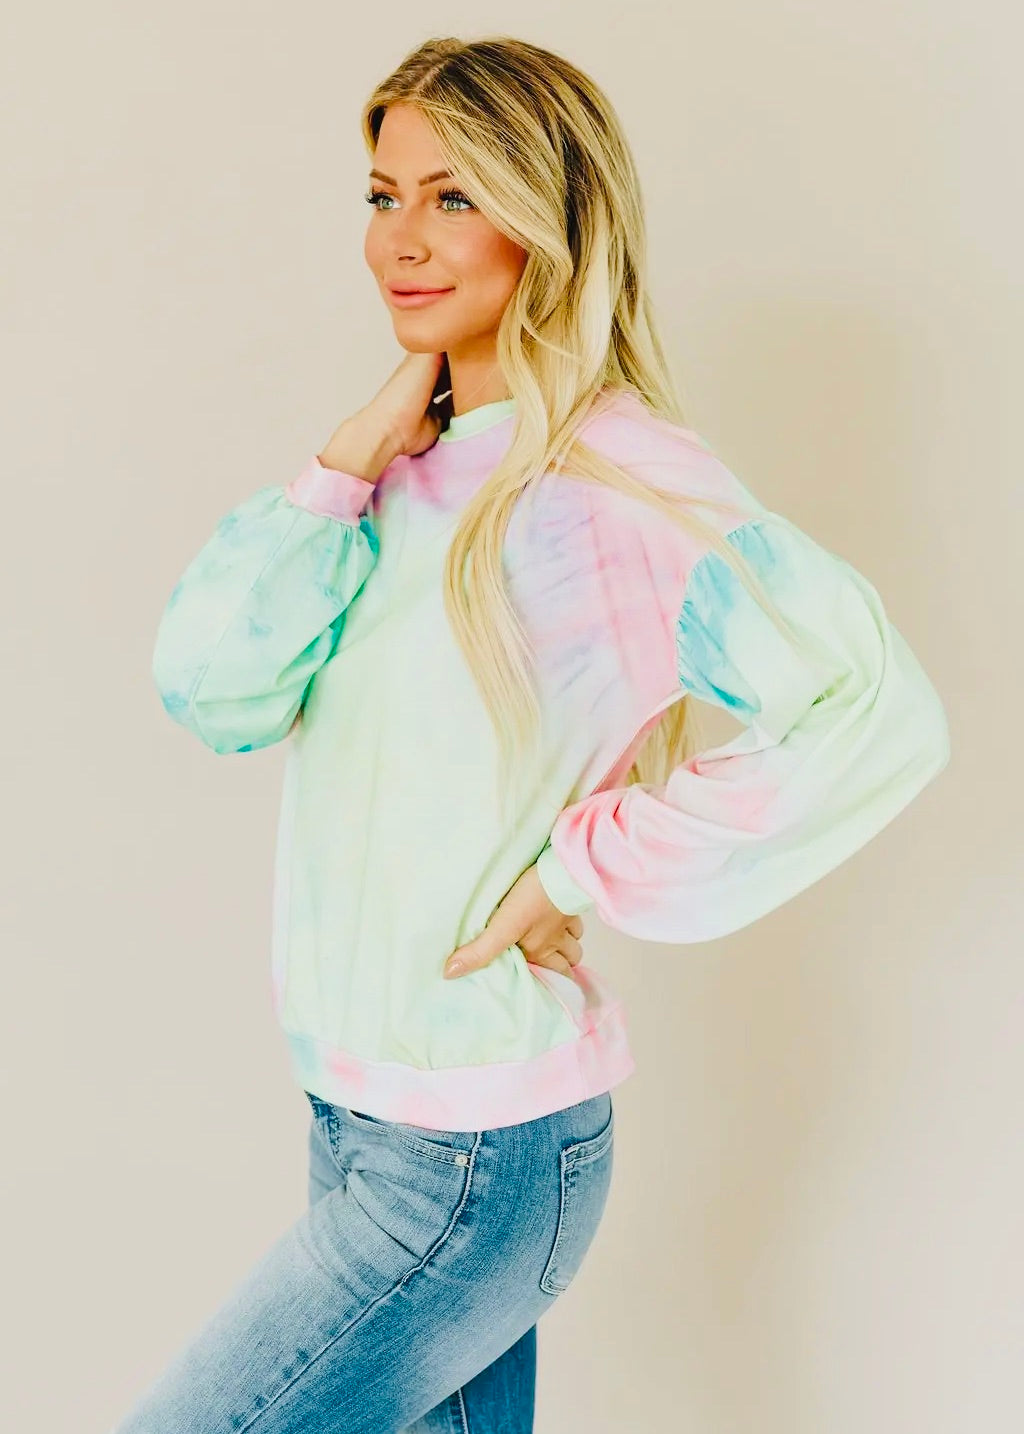 The Cotton Candy Kisses Pullover